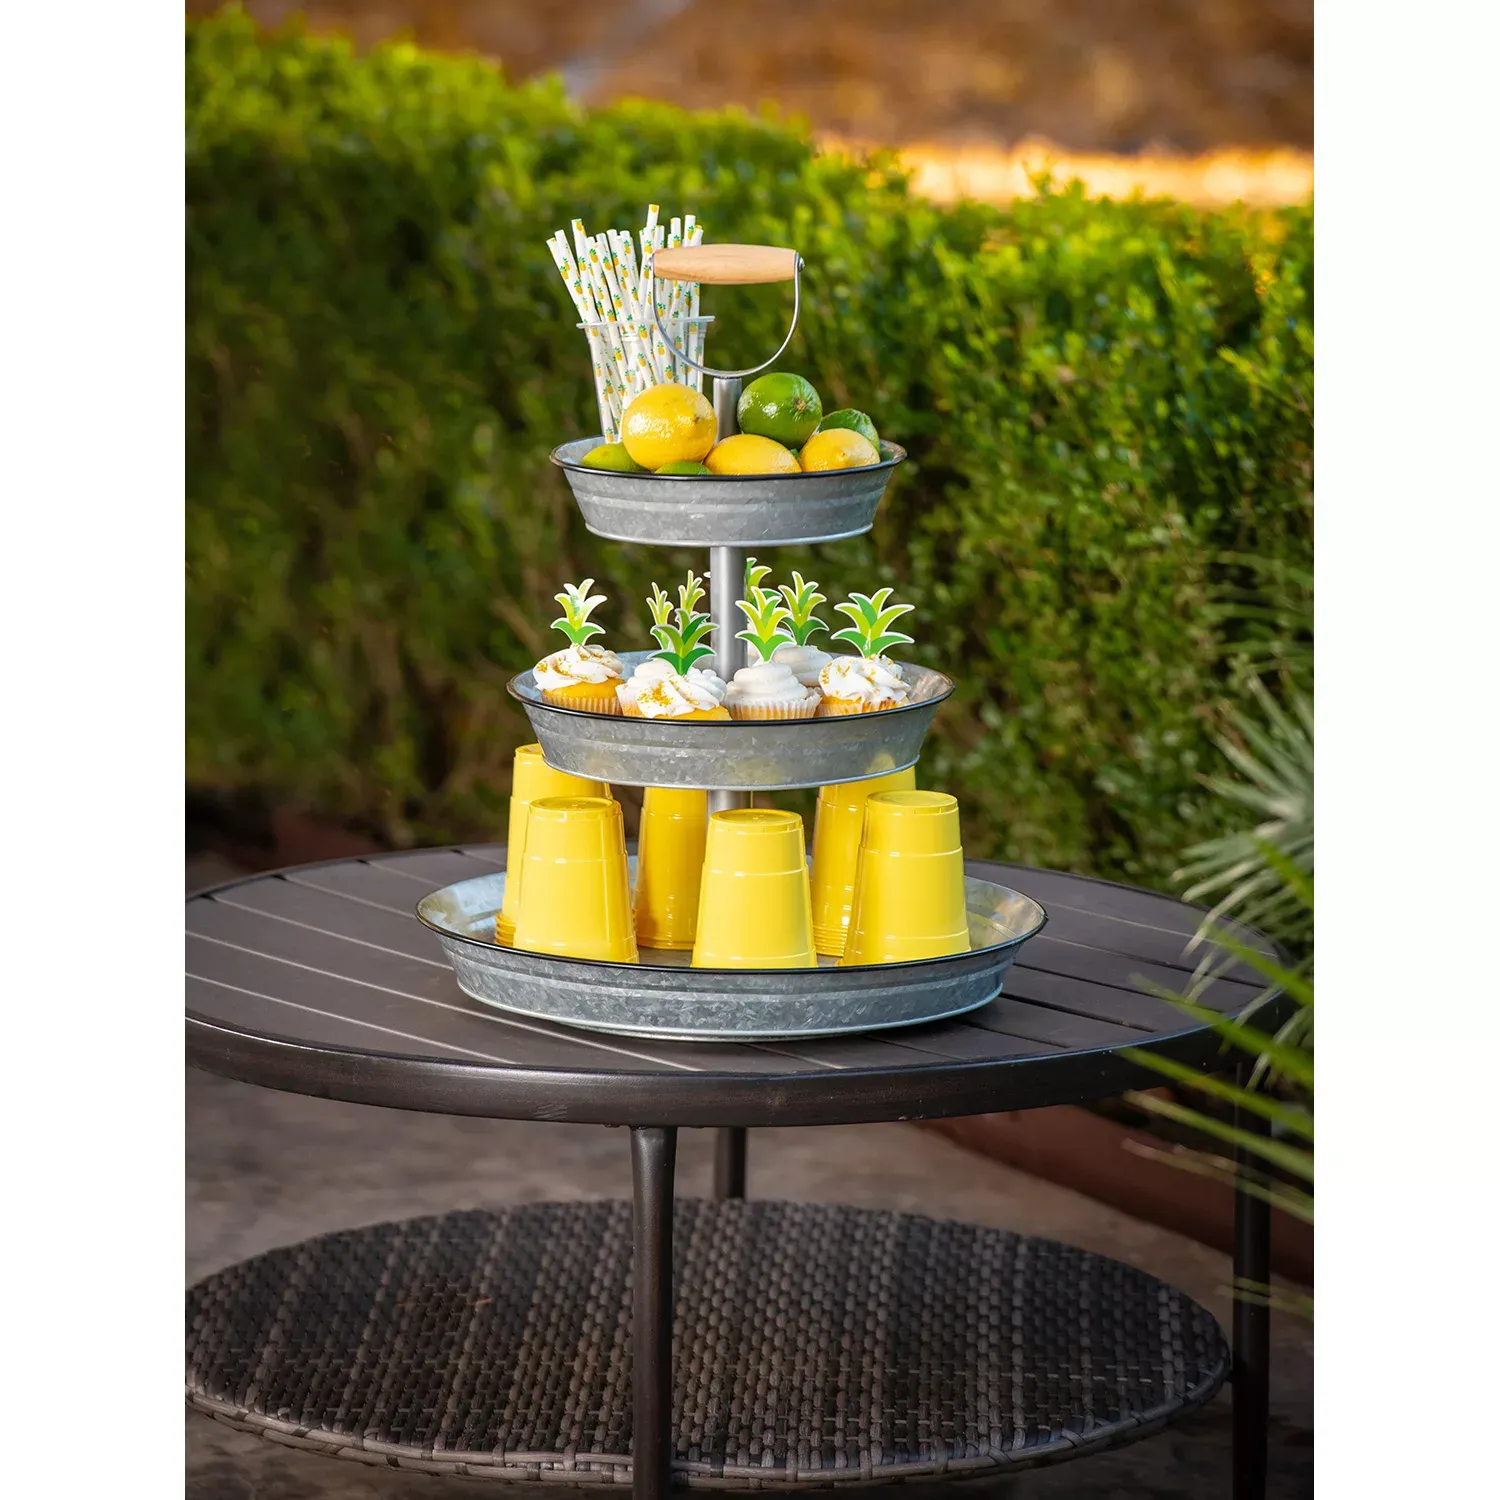 3-Tier Galvanized Stand ,Serving Tray Rustic Kitchen Tiered Tray Decor, Cupcake Stand